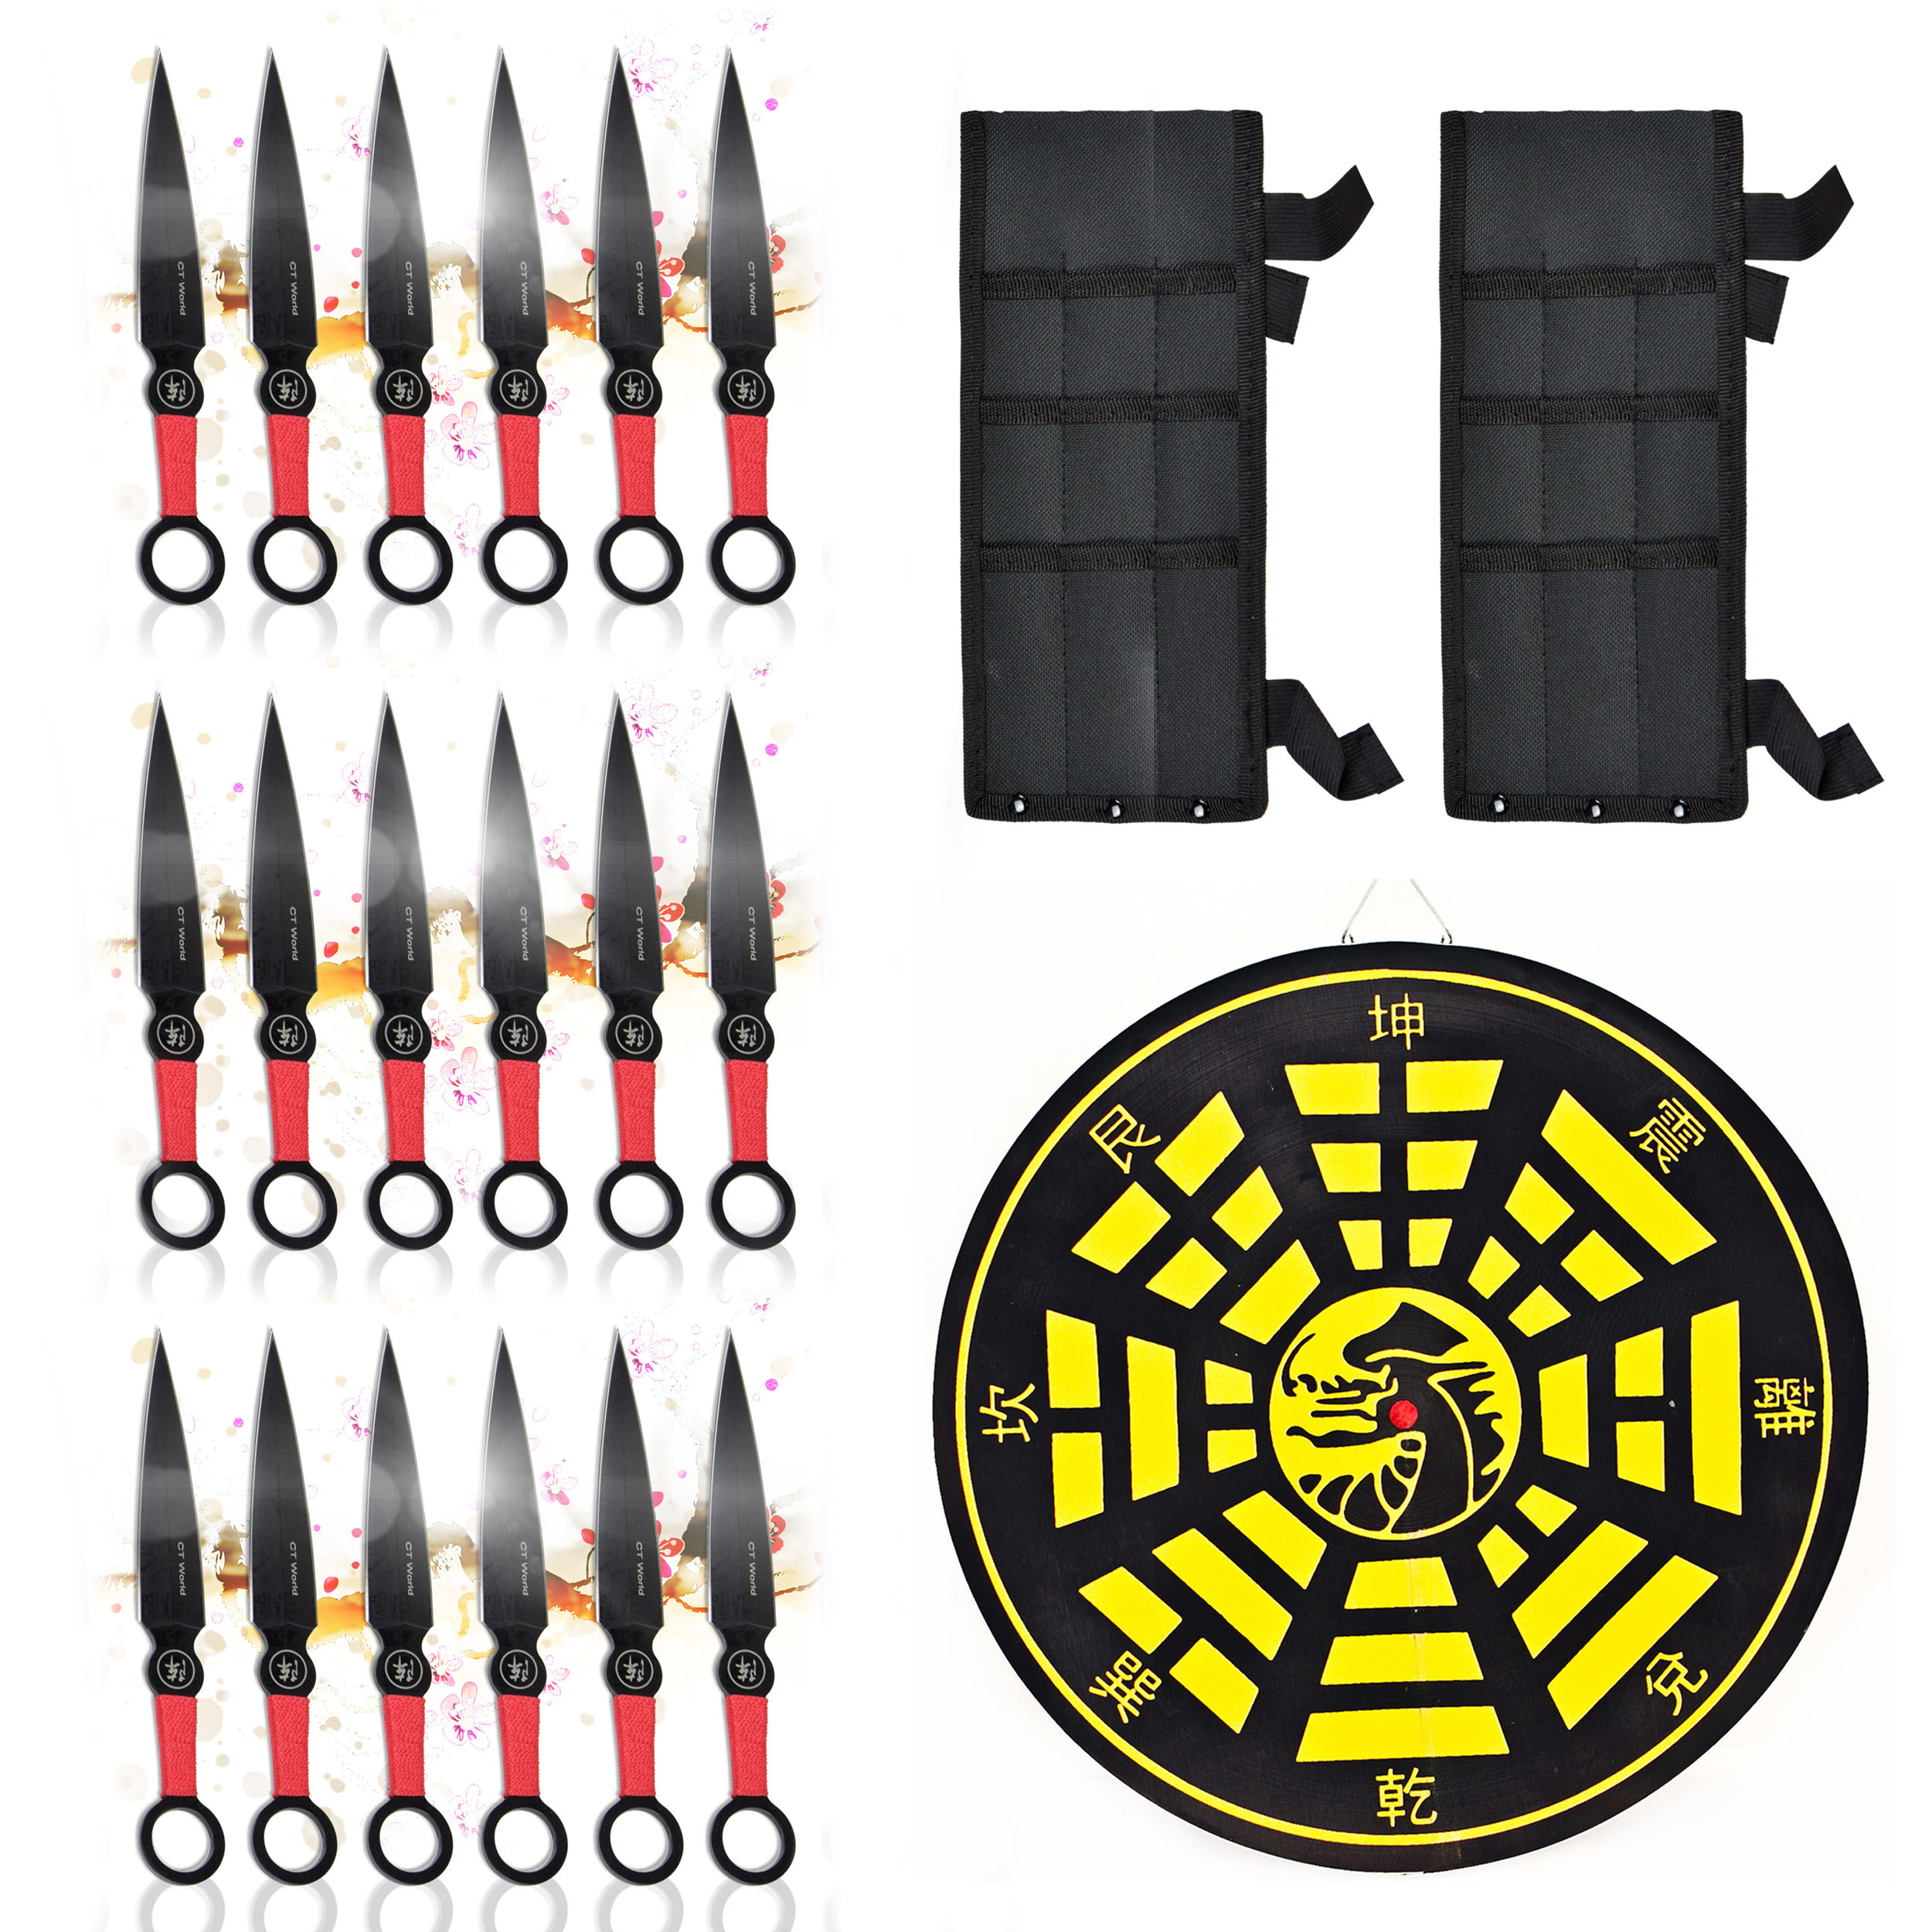 18-piece throwing knife set with target